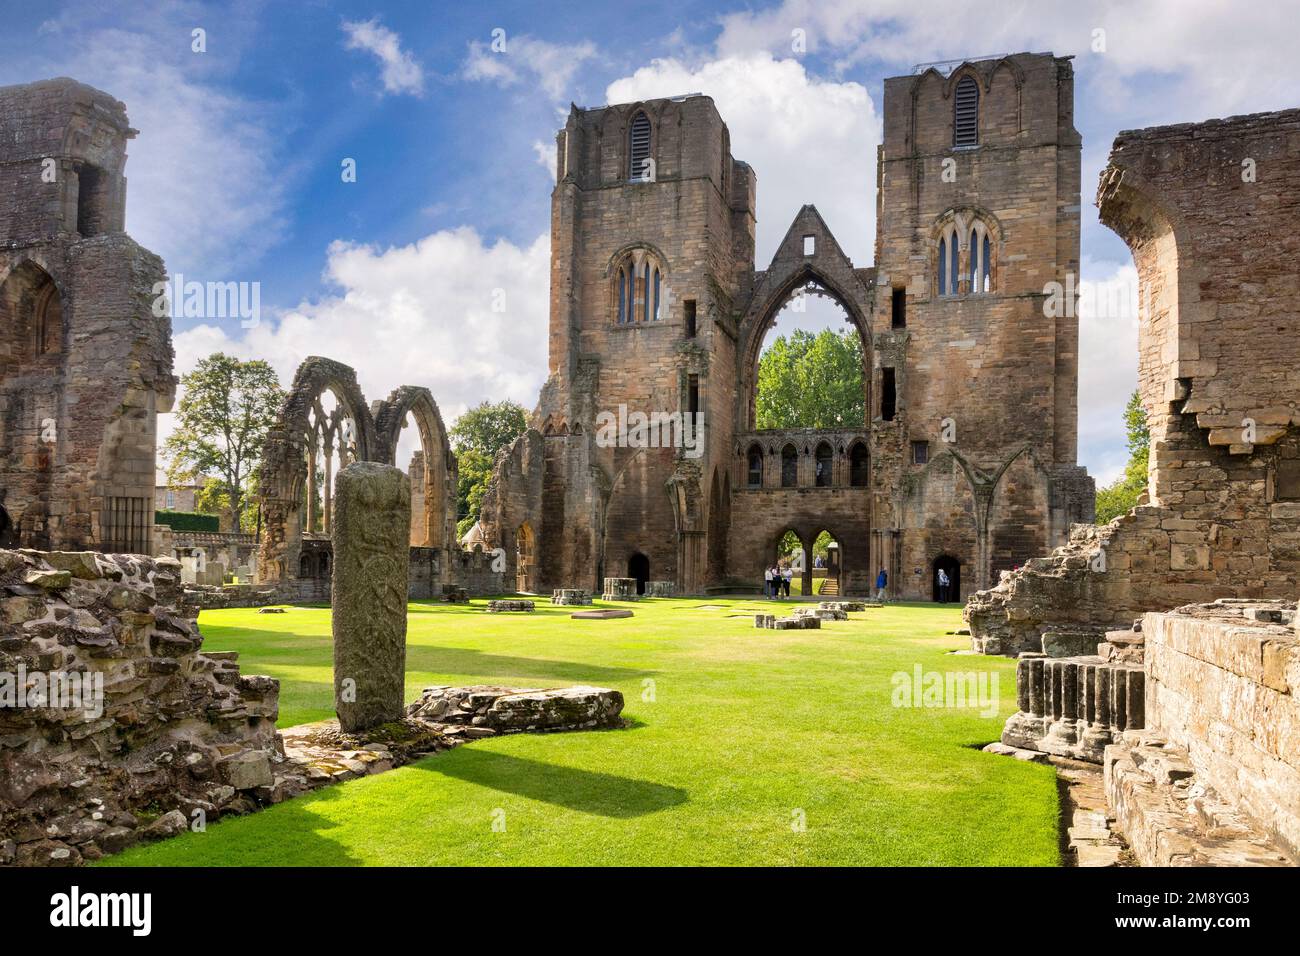 10 September 2022: Elgin, Moray, Scotland - The ruins of Elgin Cathedral in early autumn, on a beautiful sunny day. Stock Photo